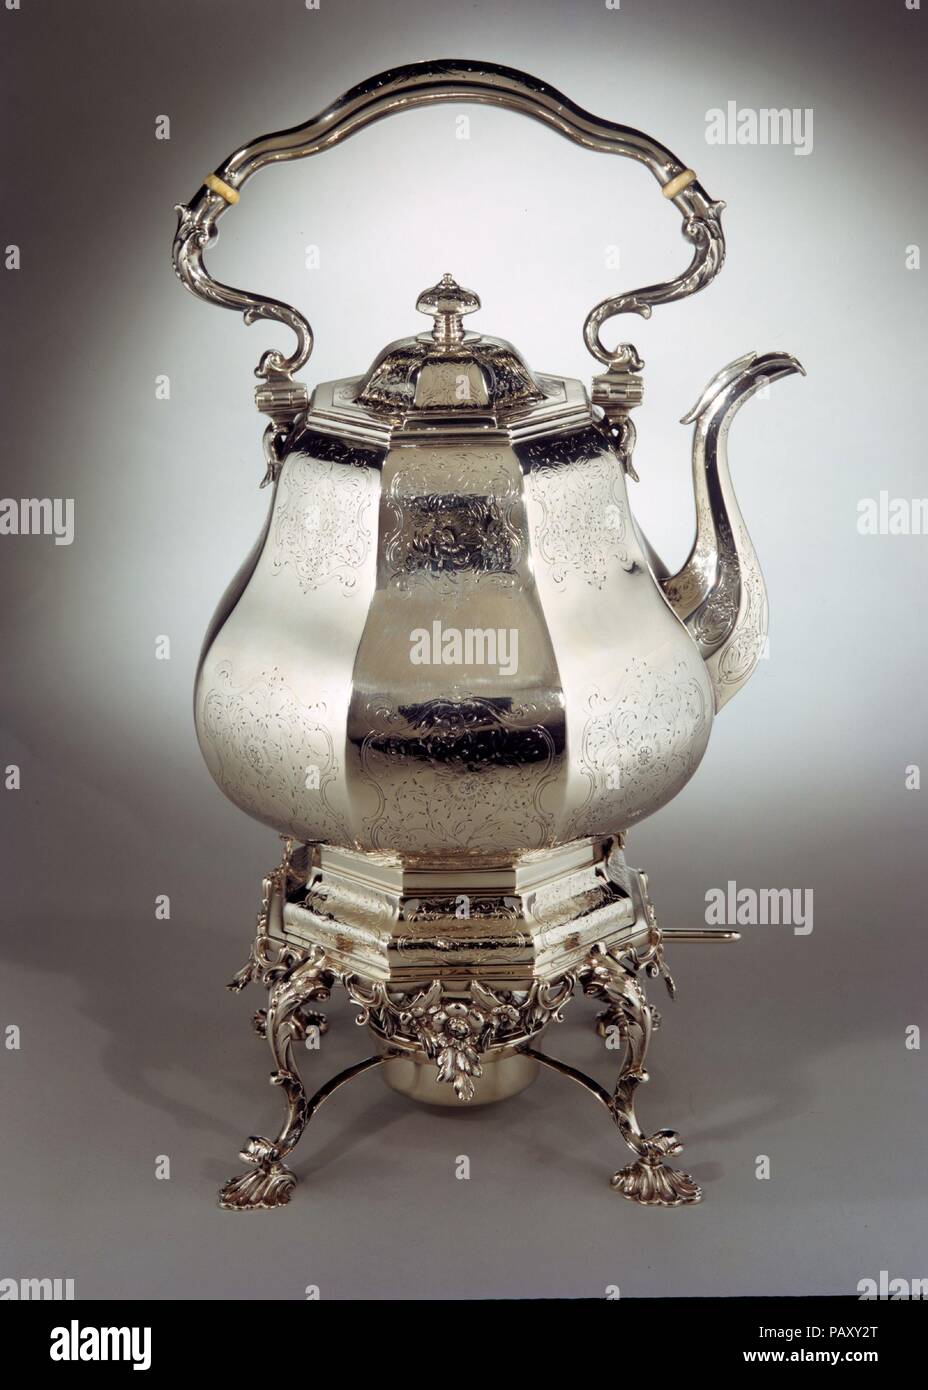 Teakettle. Culture: American. Dimensions: Overall: 15 3/4 x 9 5/16 in. (40 x 23.7 cm); 68 oz. 4 dwt. (2120.7 g)  Body: H. 11 5/8 in. (29.5 cm); 42 oz. 4 dwt. (1312.6 g)  Stand: H. 4 1/2 in. (11.4 cm); 21 oz. 10 dwt. (669.3 g)  Lamp: H. 2 3/8 x 2 3/4 in. (6 x 7 cm); 4 oz. 9 dwt. (138.8 g). Maker: William Forbes (baptized 1799, active New York, 1826-63). Retailer: Ball, Tompkins and Black (active 1839-51). Date: ca. 1840. Museum: Metropolitan Museum of Art, New York, USA. Stock Photo